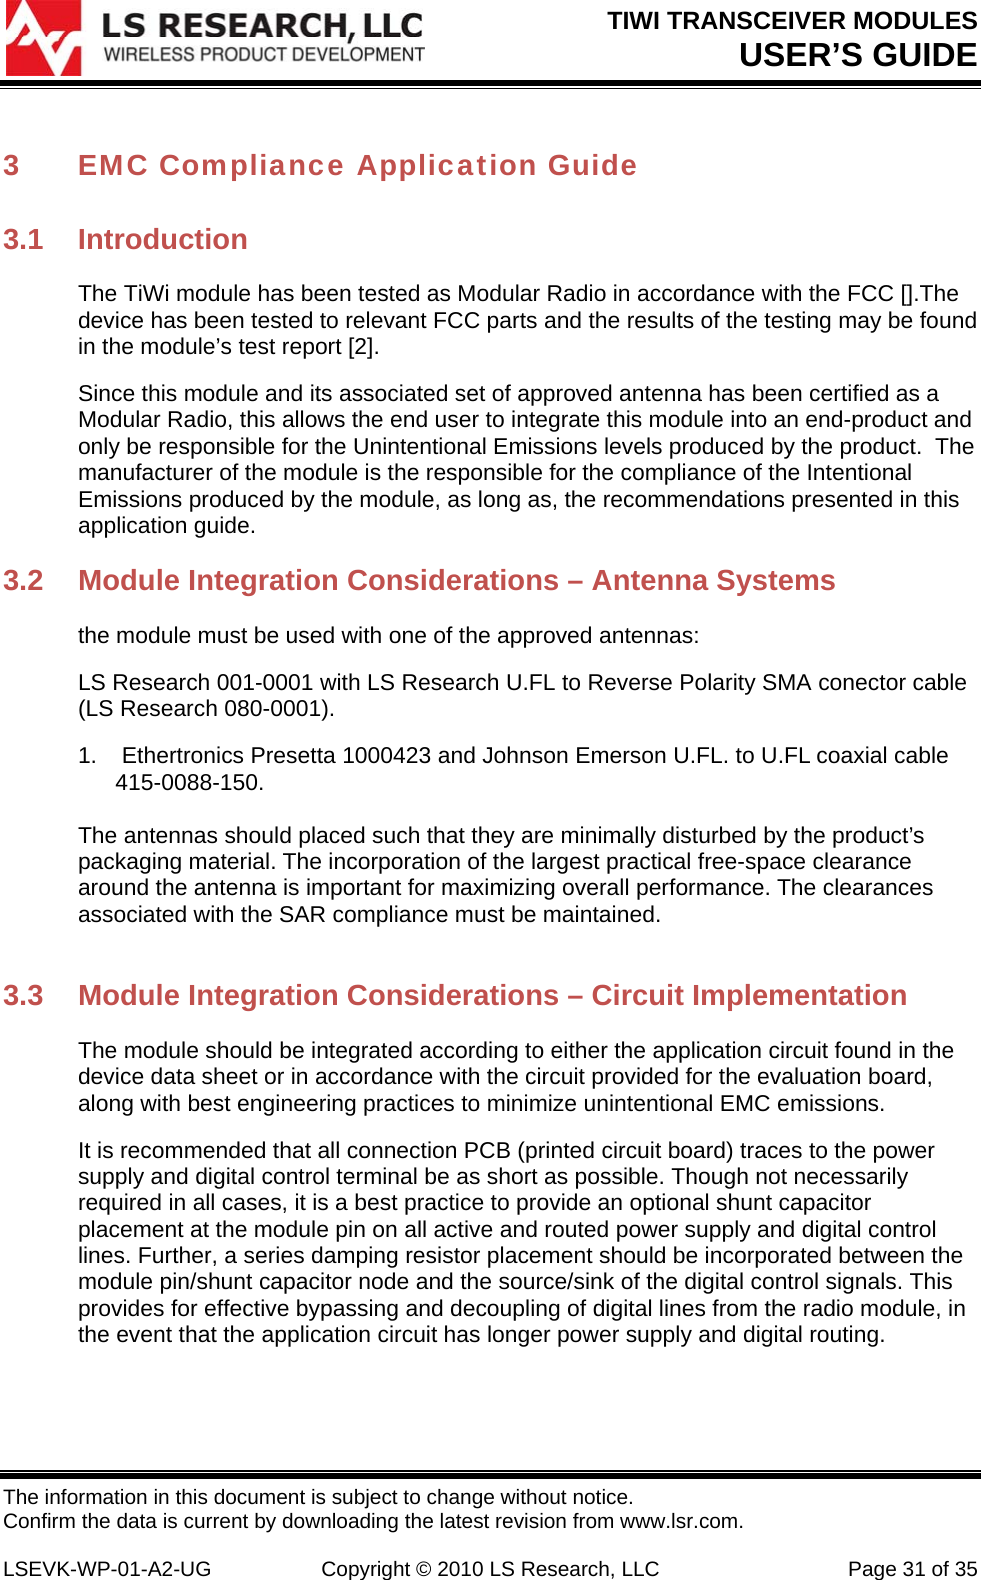 TIWI TRANSCEIVER MODULES USER’S GUIDE The information in this document is subject to change without notice. Confirm the data is current by downloading the latest revision from www.lsr.com.  LSEVK-WP-01-A2-UG  Copyright © 2010 LS Research, LLC  Page 31 of 35 3 EMC Compliance Application Guide  3.1 Introduction The TiWi module has been tested as Modular Radio in accordance with the FCC [].The device has been tested to relevant FCC parts and the results of the testing may be found in the module’s test report [2]. Since this module and its associated set of approved antenna has been certified as a Modular Radio, this allows the end user to integrate this module into an end-product and only be responsible for the Unintentional Emissions levels produced by the product.  The manufacturer of the module is the responsible for the compliance of the Intentional Emissions produced by the module, as long as, the recommendations presented in this application guide. 3.2  Module Integration Considerations – Antenna Systems the module must be used with one of the approved antennas:  LS Research 001-0001 with LS Research U.FL to Reverse Polarity SMA conector cable (LS Research 080-0001).  1.   Ethertronics Presetta 1000423 and Johnson Emerson U.FL. to U.FL coaxial cable 415-0088-150.     The antennas should placed such that they are minimally disturbed by the product’s packaging material. The incorporation of the largest practical free-space clearance around the antenna is important for maximizing overall performance. The clearances associated with the SAR compliance must be maintained.   3.3  Module Integration Considerations – Circuit Implementation The module should be integrated according to either the application circuit found in the device data sheet or in accordance with the circuit provided for the evaluation board, along with best engineering practices to minimize unintentional EMC emissions.  It is recommended that all connection PCB (printed circuit board) traces to the power supply and digital control terminal be as short as possible. Though not necessarily required in all cases, it is a best practice to provide an optional shunt capacitor placement at the module pin on all active and routed power supply and digital control lines. Further, a series damping resistor placement should be incorporated between the module pin/shunt capacitor node and the source/sink of the digital control signals. This provides for effective bypassing and decoupling of digital lines from the radio module, in the event that the application circuit has longer power supply and digital routing.  